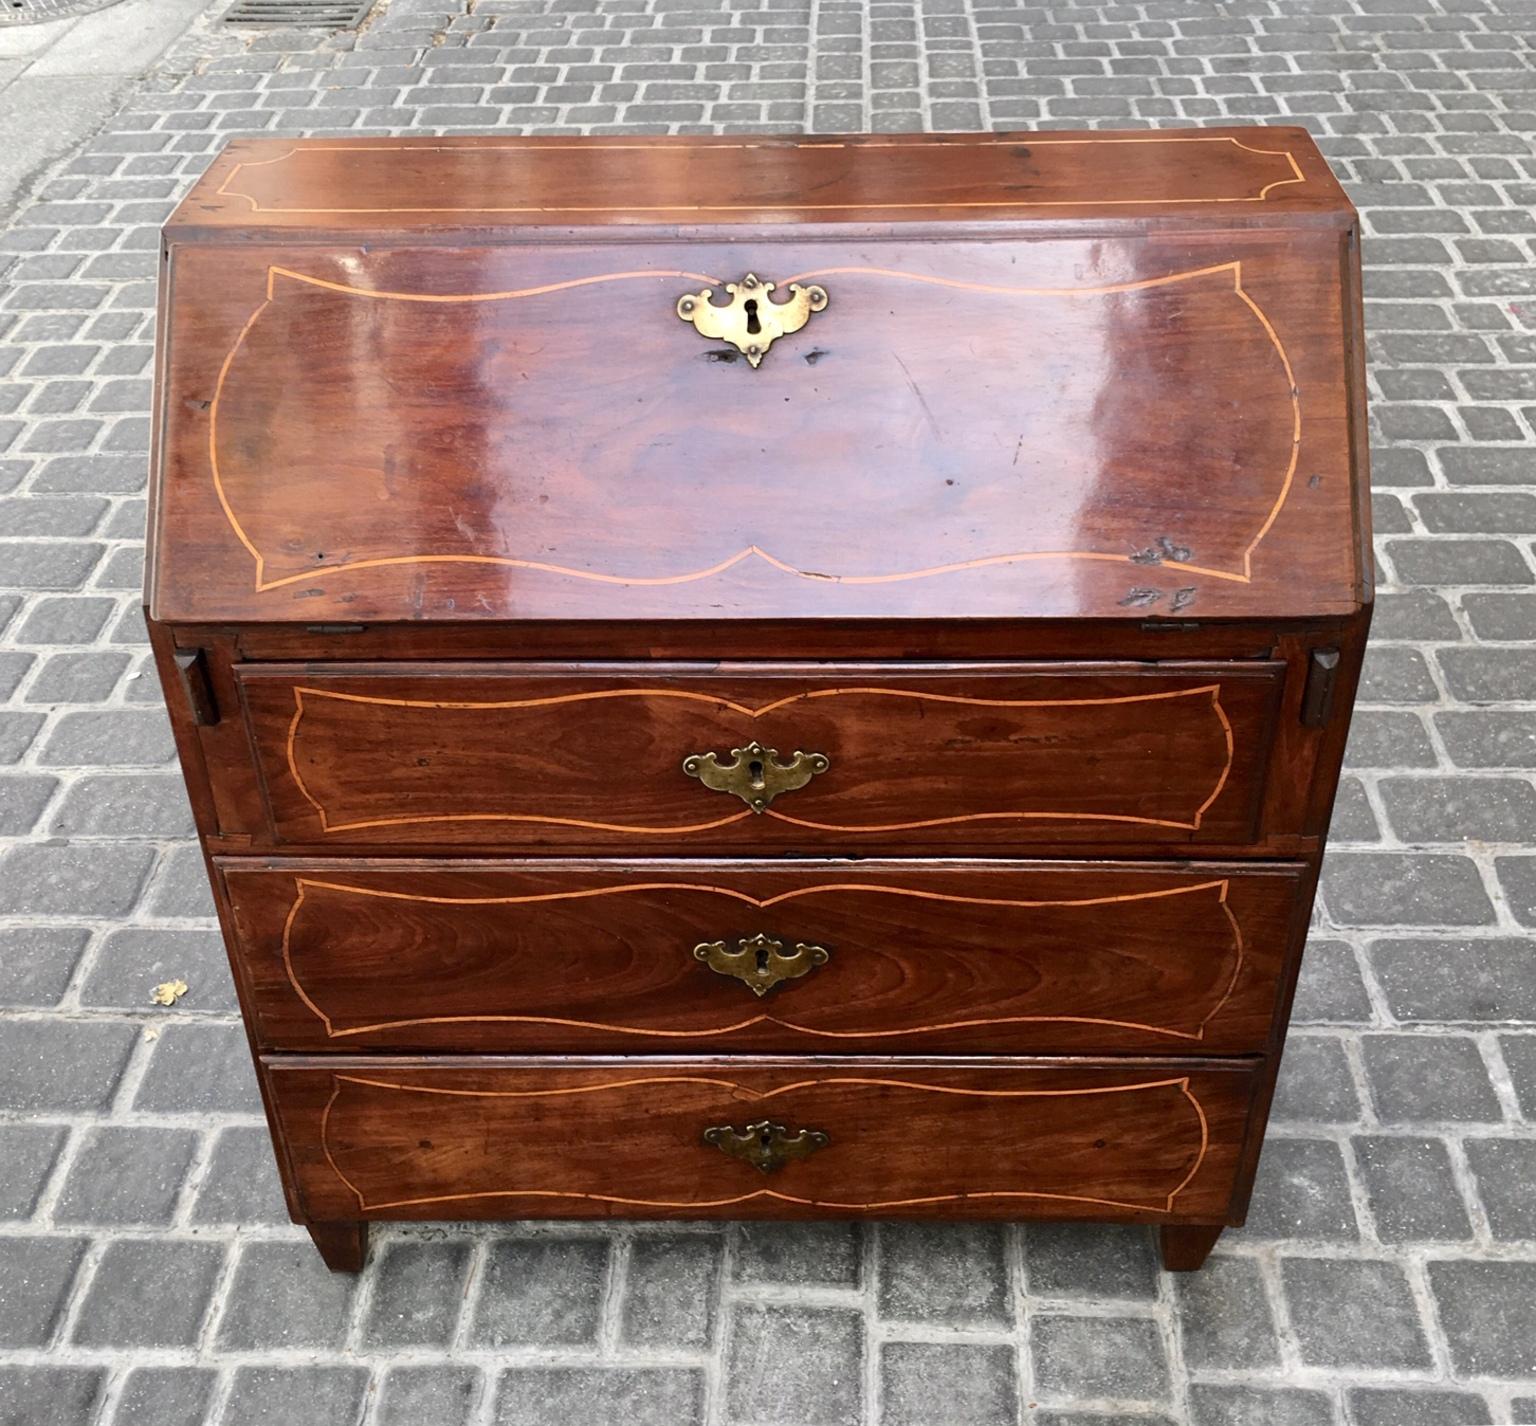 Elegant Spanish Bureau of the 18th century, at the time Carlos IV, its size is smaller than usual, to be transported on trips, it is made of mahogany wood with inlaid marquetry in boxwood.
It consists of three drawers with original bronze